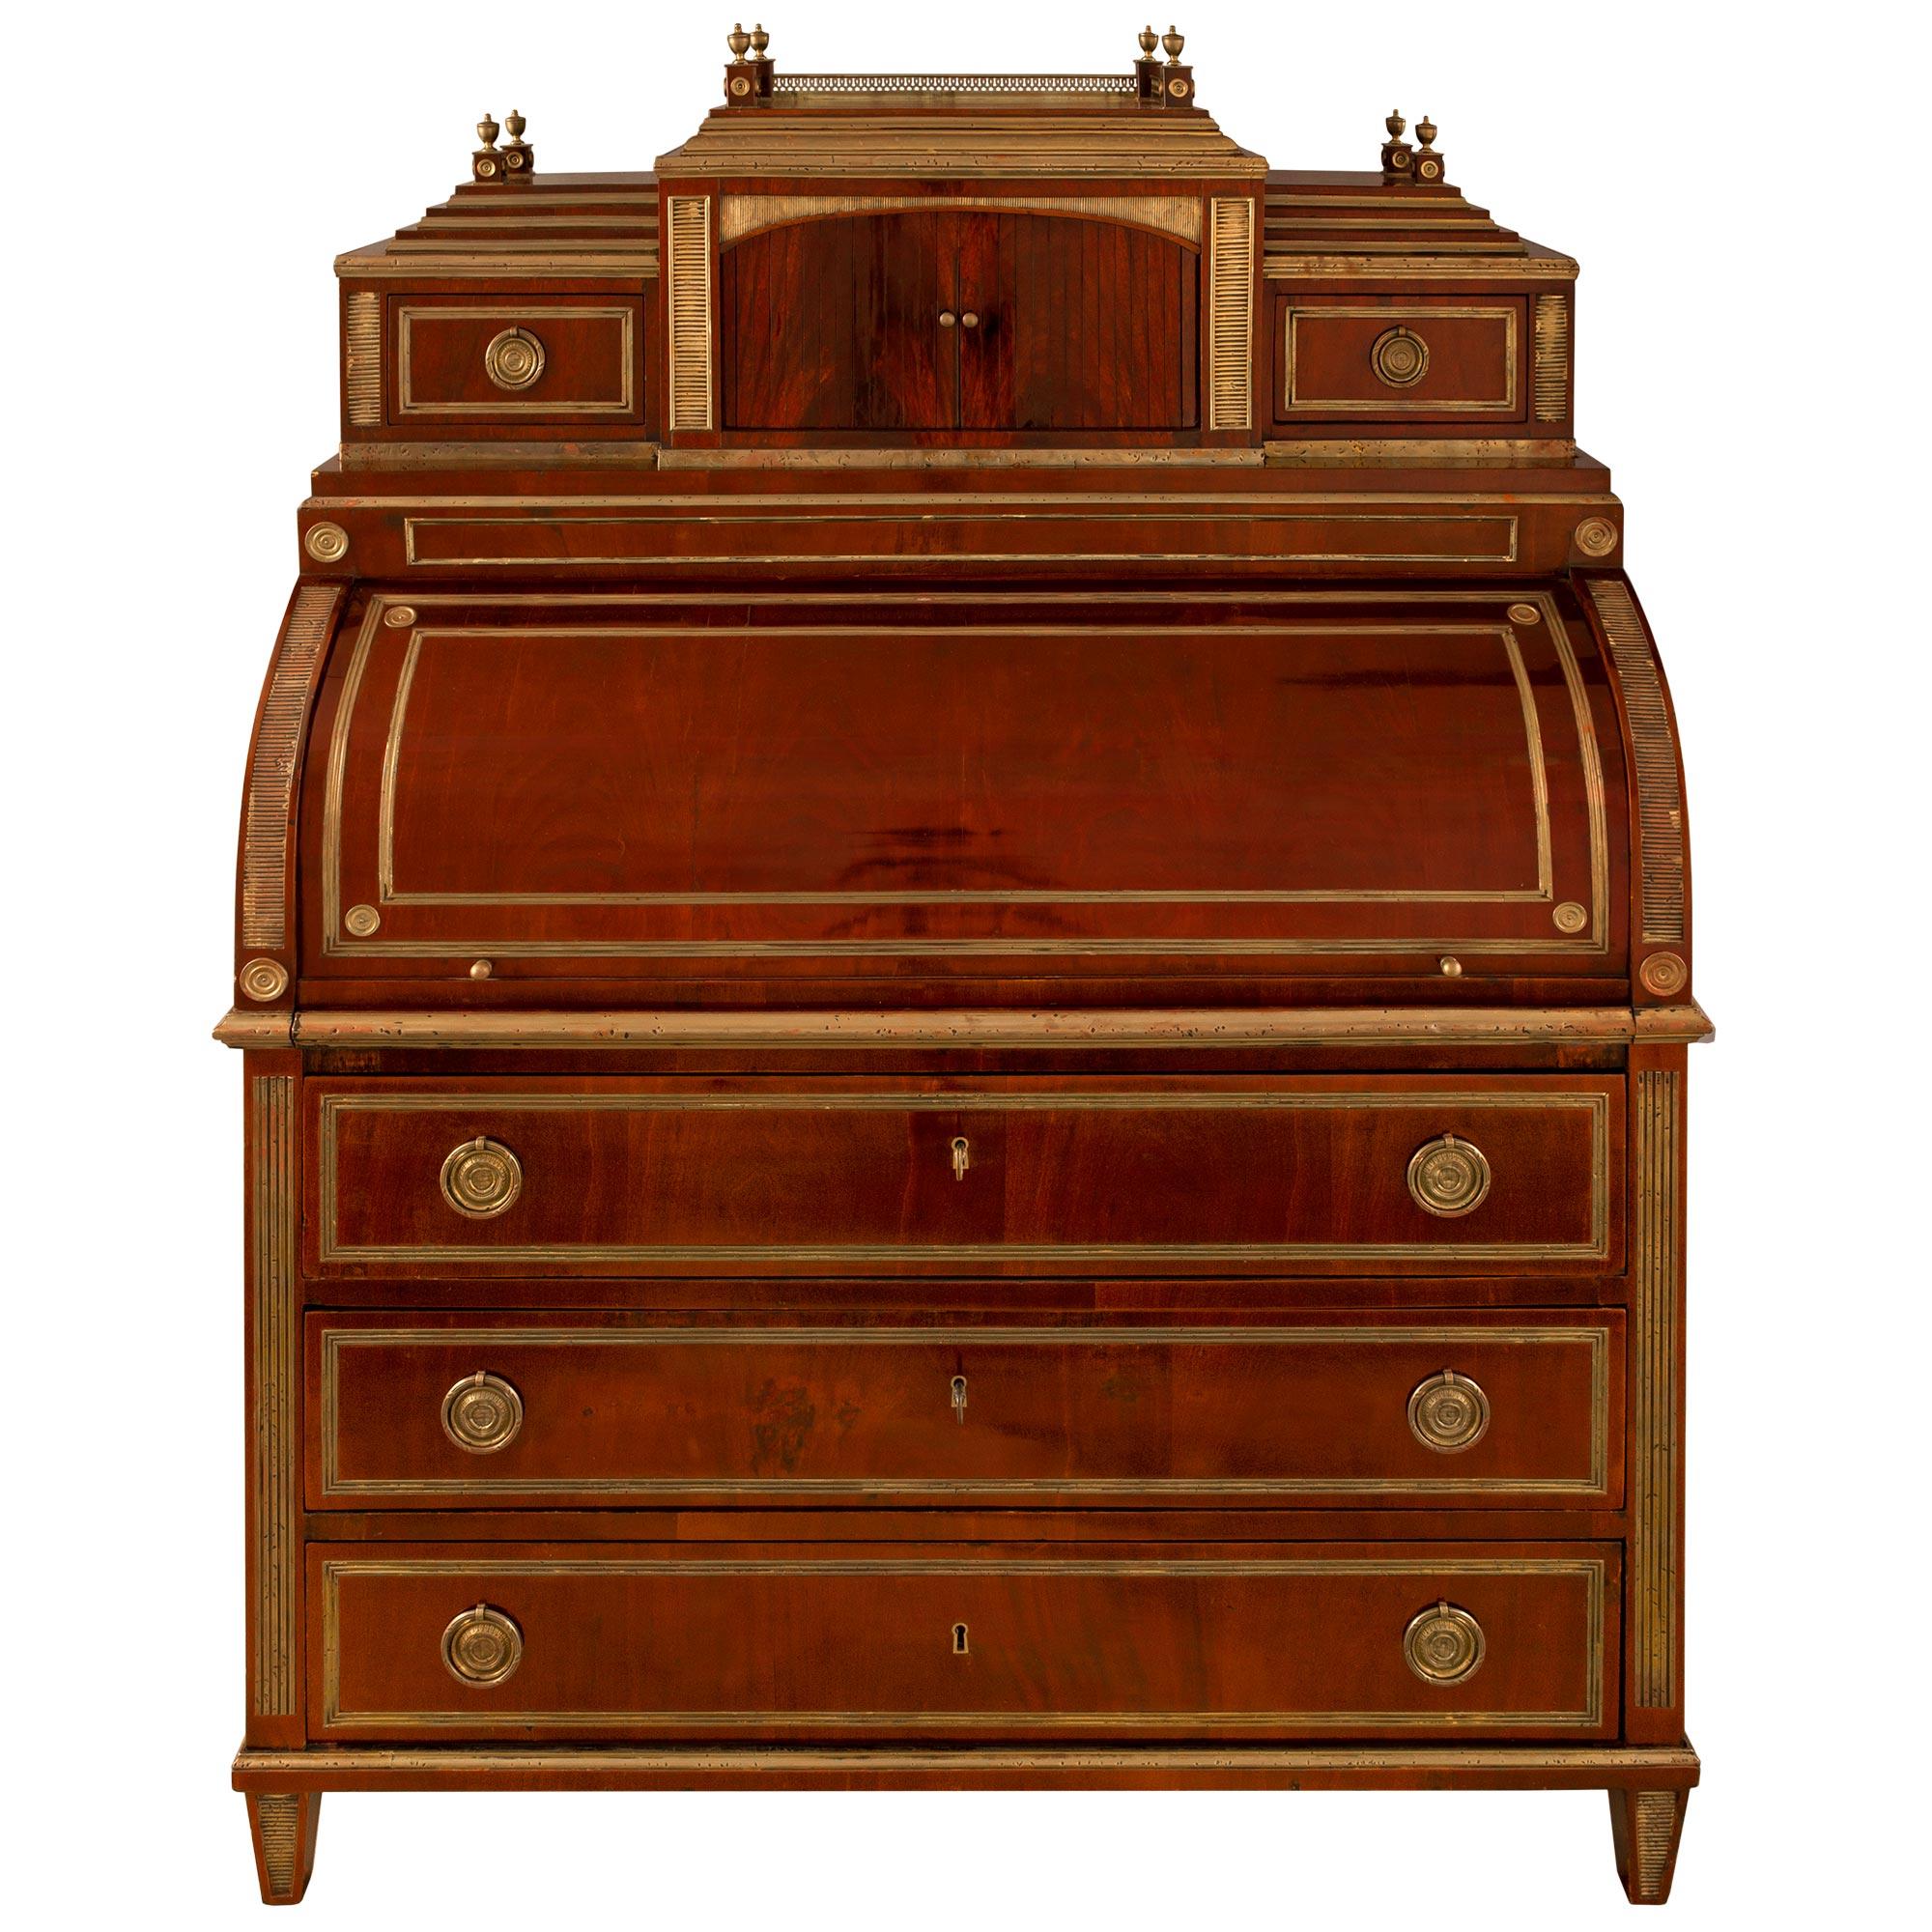 A very high quality and spectacular Russian early 19th century Empire style mahogany ' Bureau a Cylindre' with all original gilt and hardware. The square feet with brass reeded plaques below three large drawers bordered with brass filets have ormolu